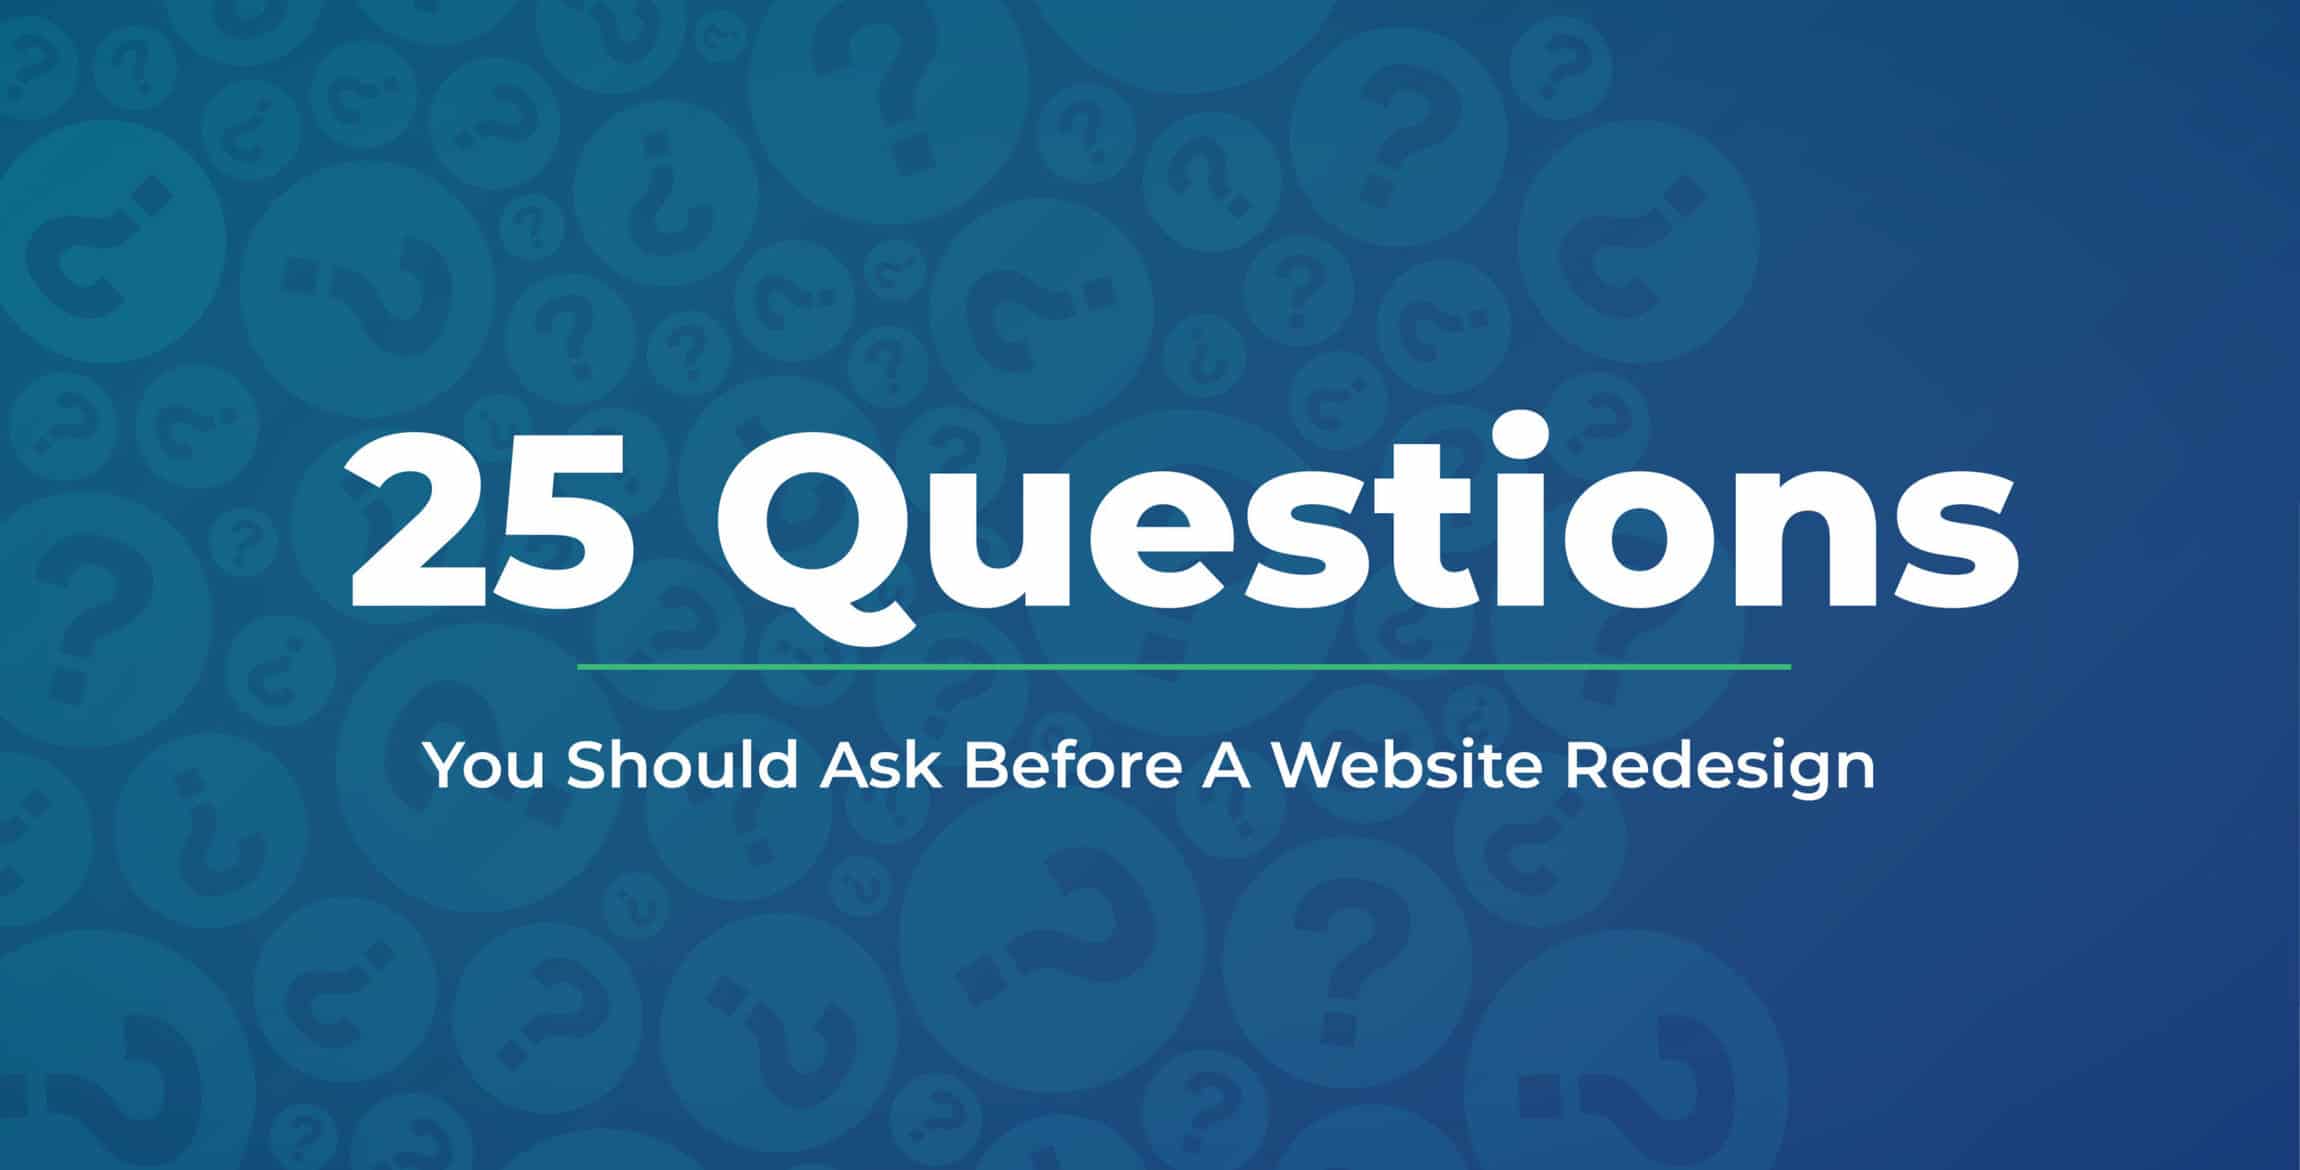 25 questions to ask before a website redesign